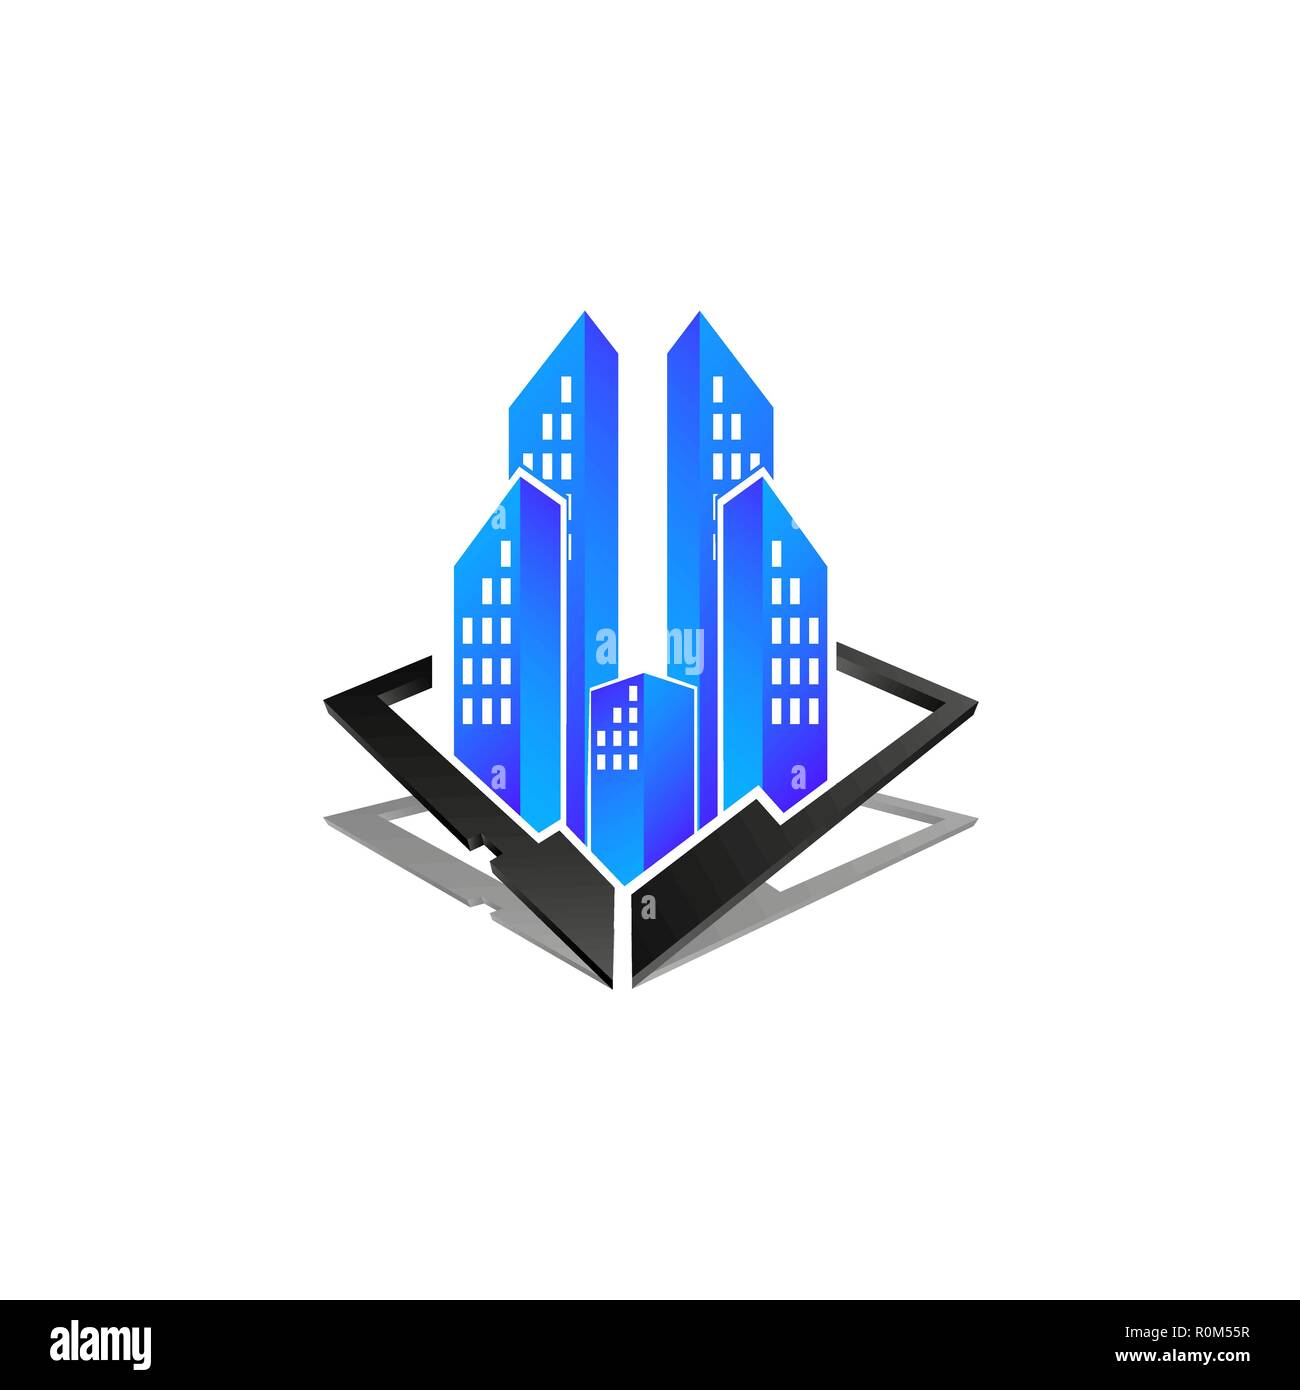 Real estate logo concept illustration, Building logo in three dimensional graphic style Stock Vector